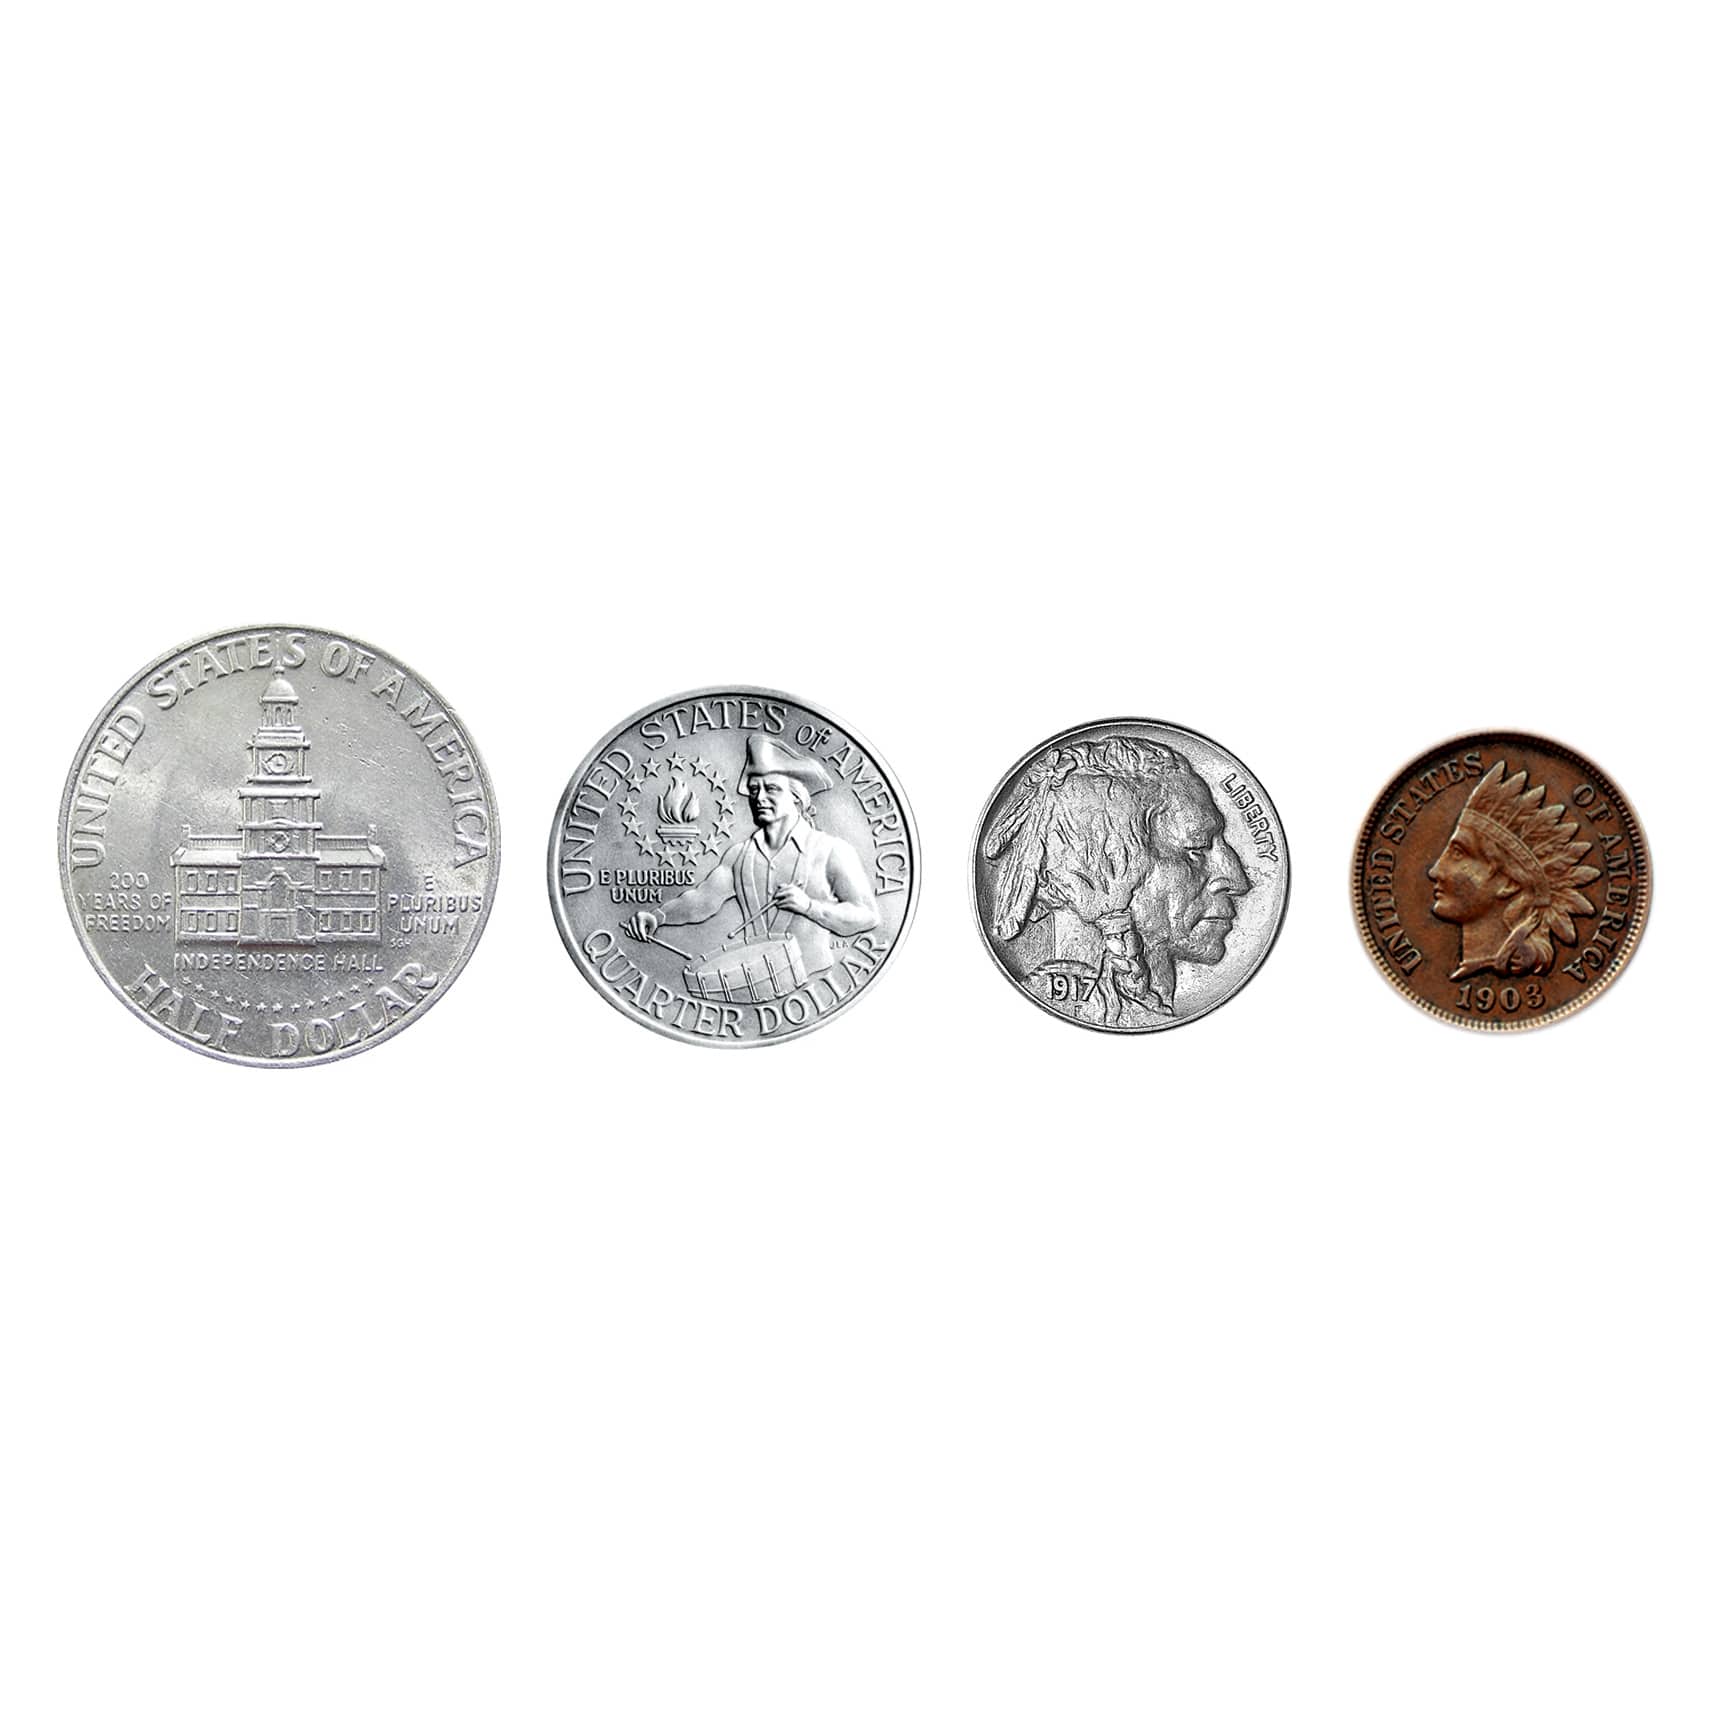 USA Four Most Famous Coins